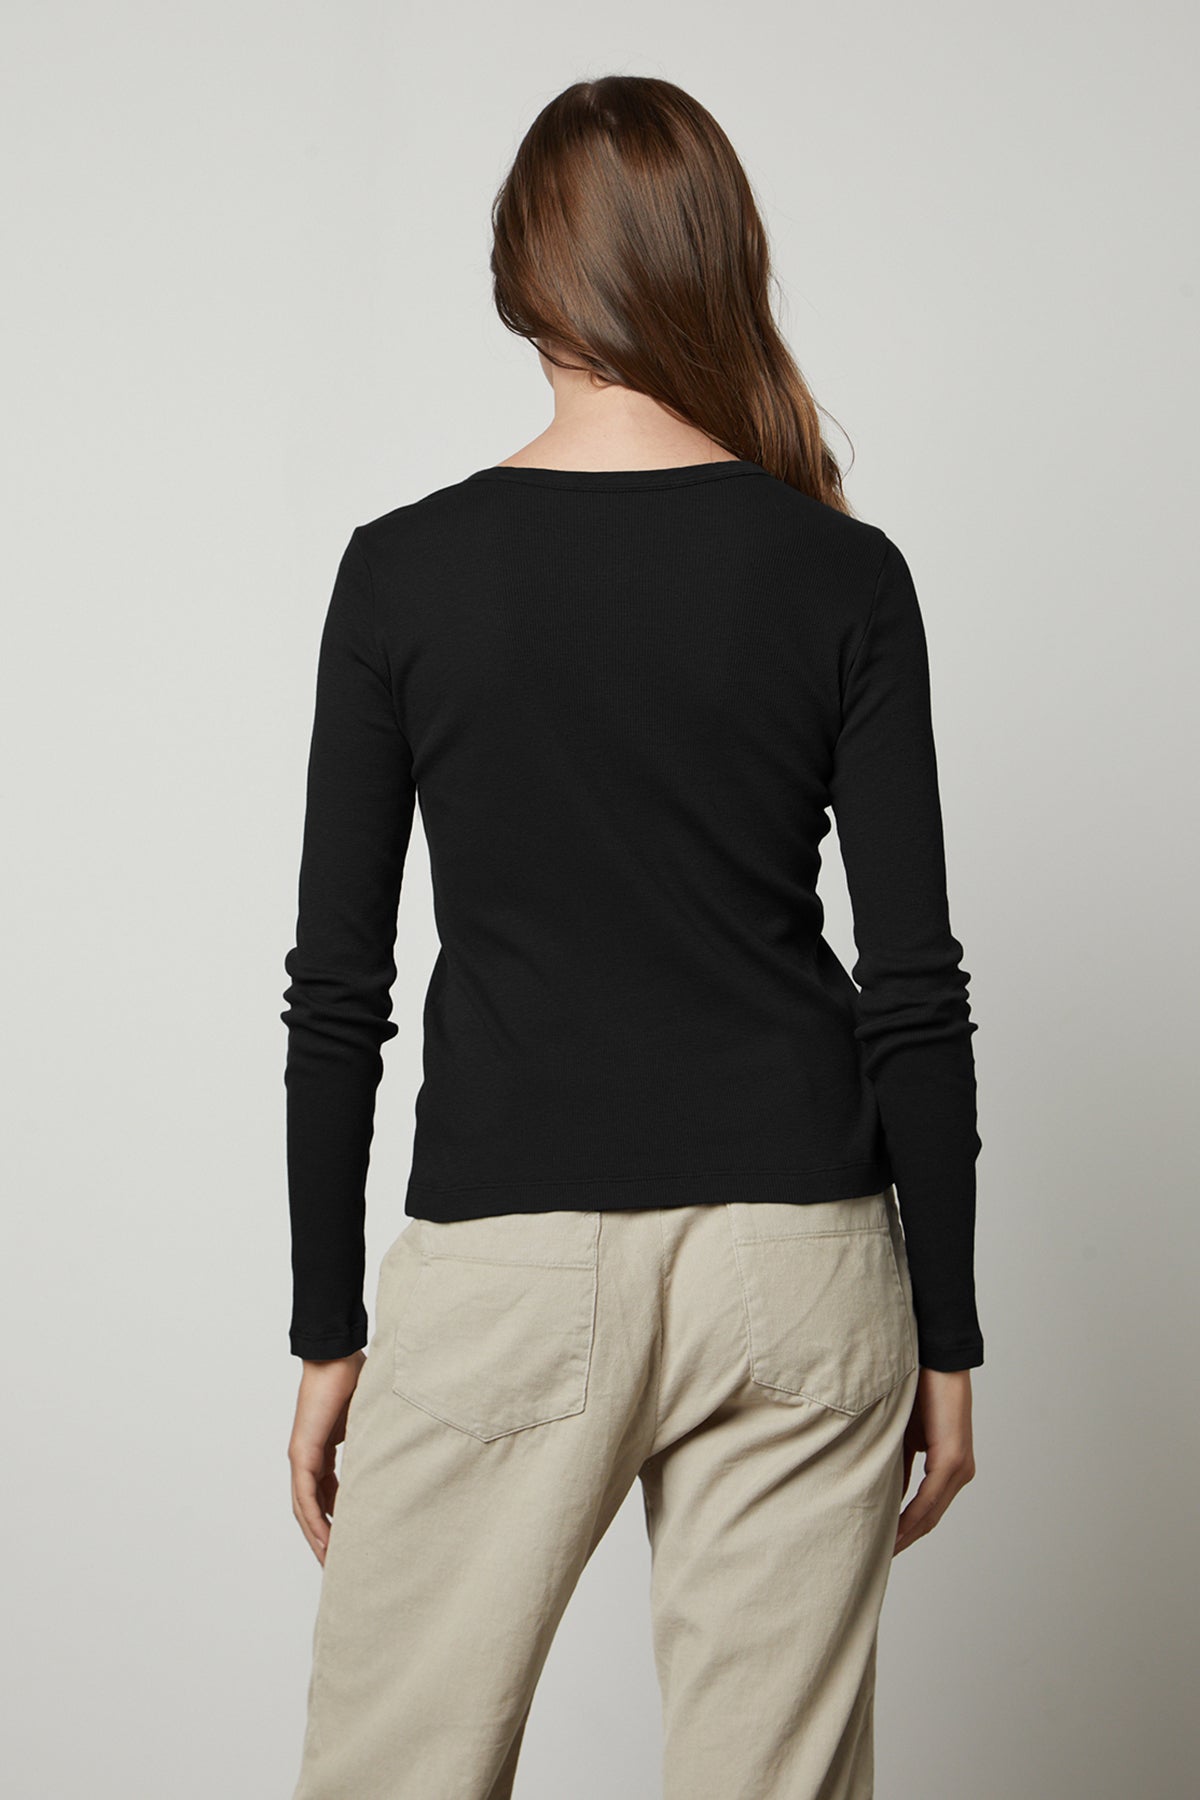 The back view of a woman wearing a Velvet by Graham & Spencer BAYLER RIBBED SCOOP NECK TEE and beige pants.-35206768722113